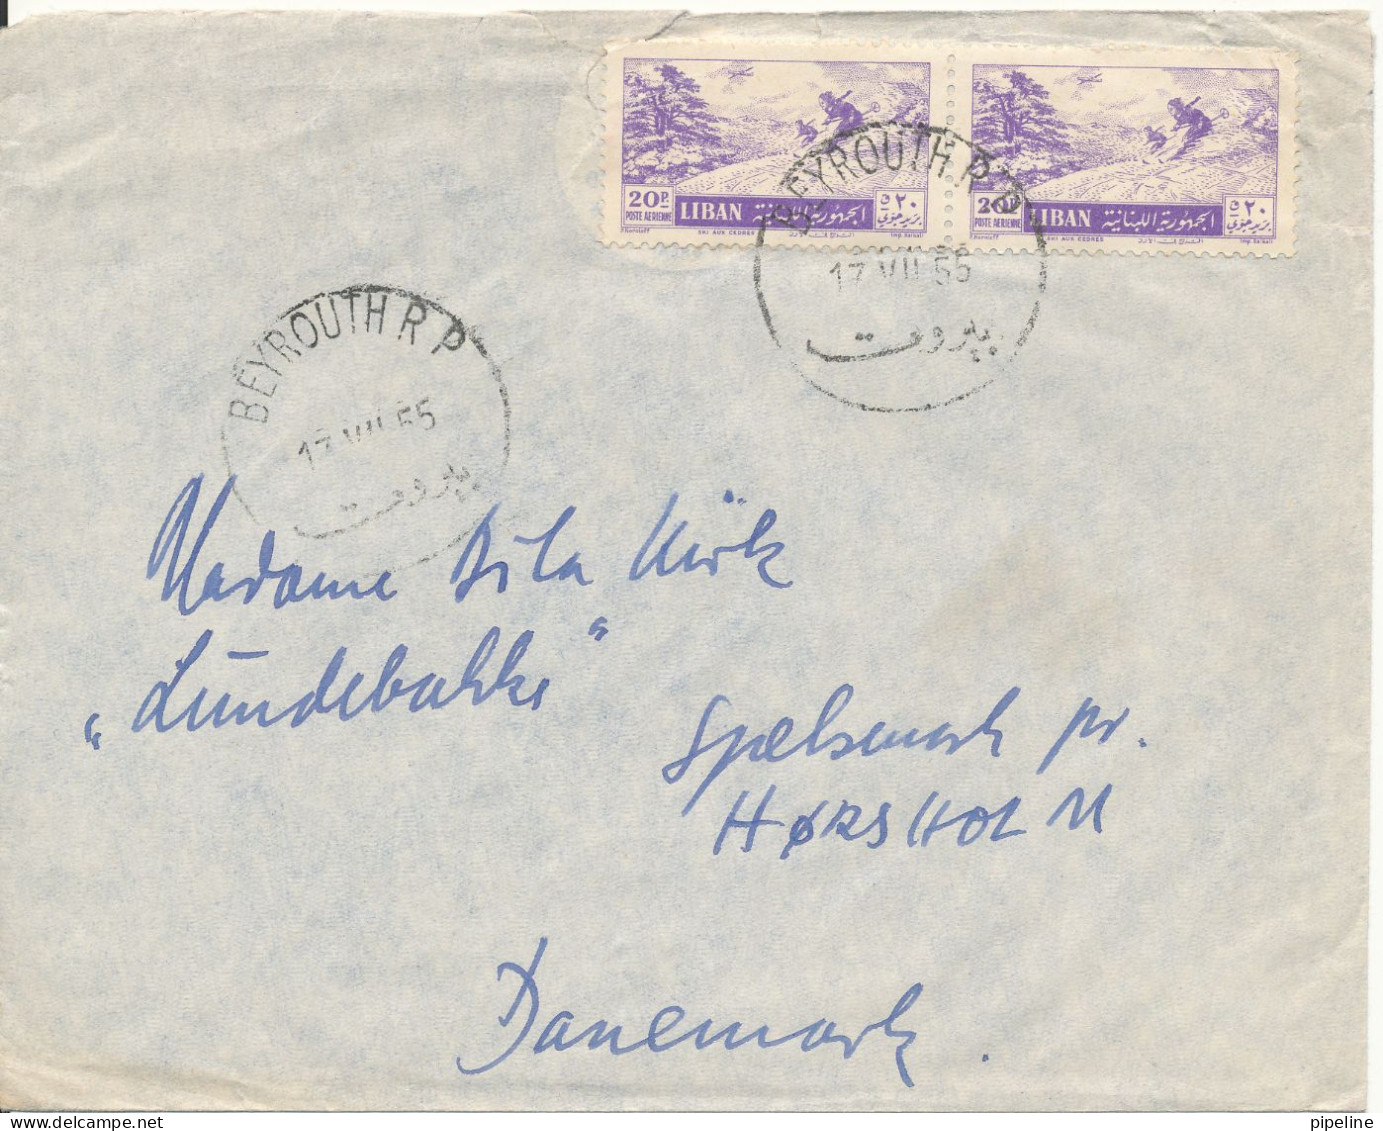 Lebanon Air Mail Cover Sent To Denmark Beyrouth 17-7-1955 (the Cover Is Damaged At The Top) - Lebanon